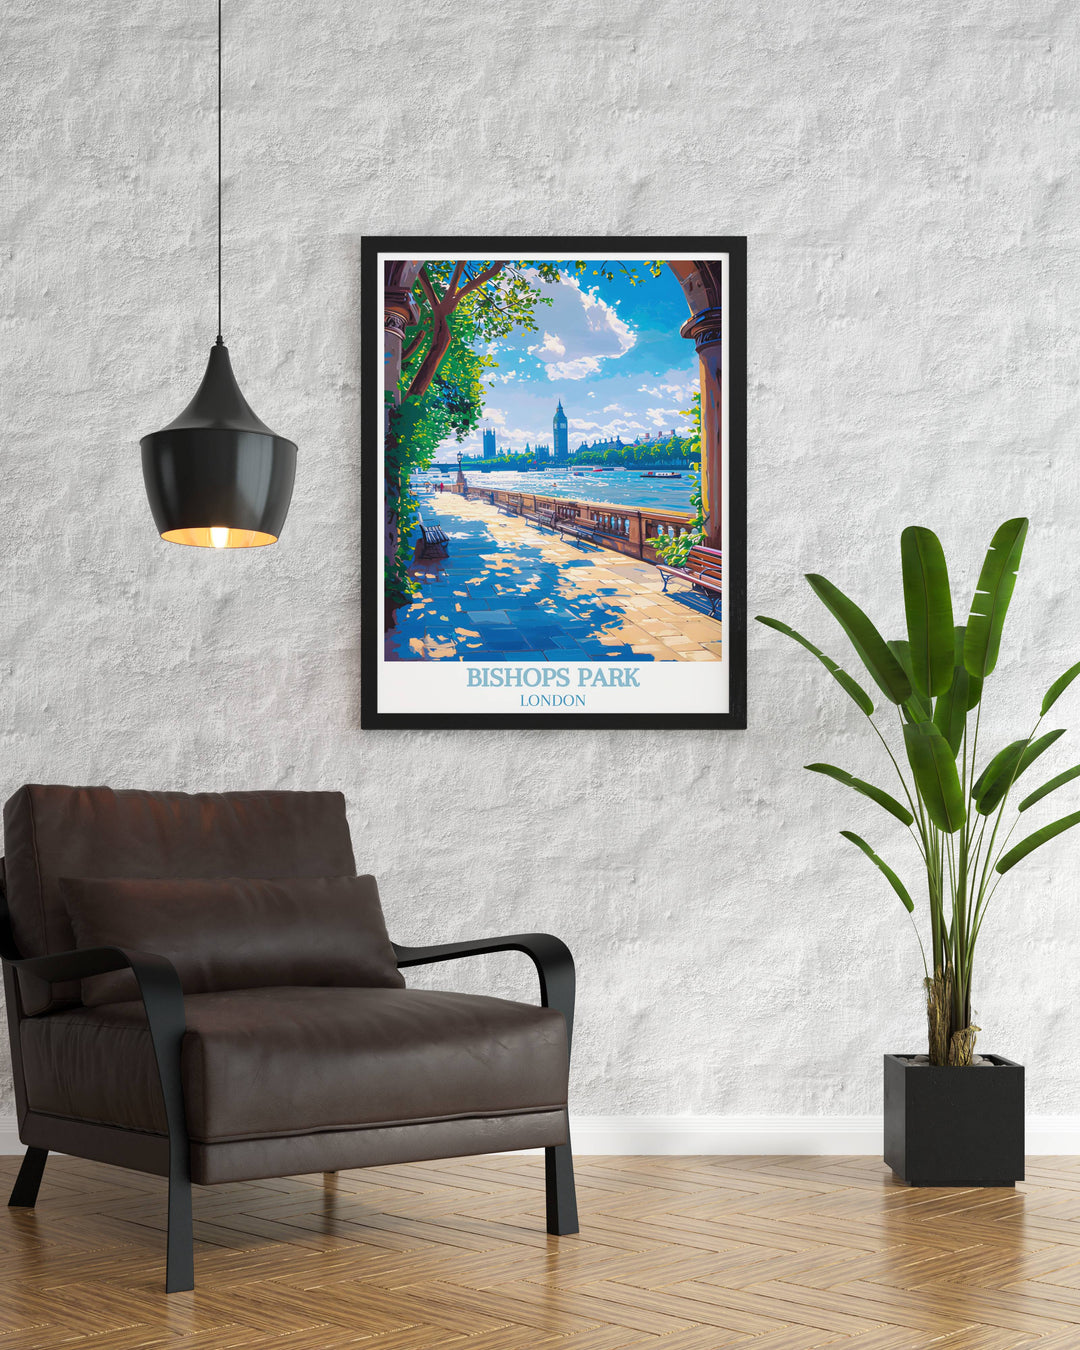 Beautiful art print of Thames River Walk presenting a lively view of Londons favorite riverside destination